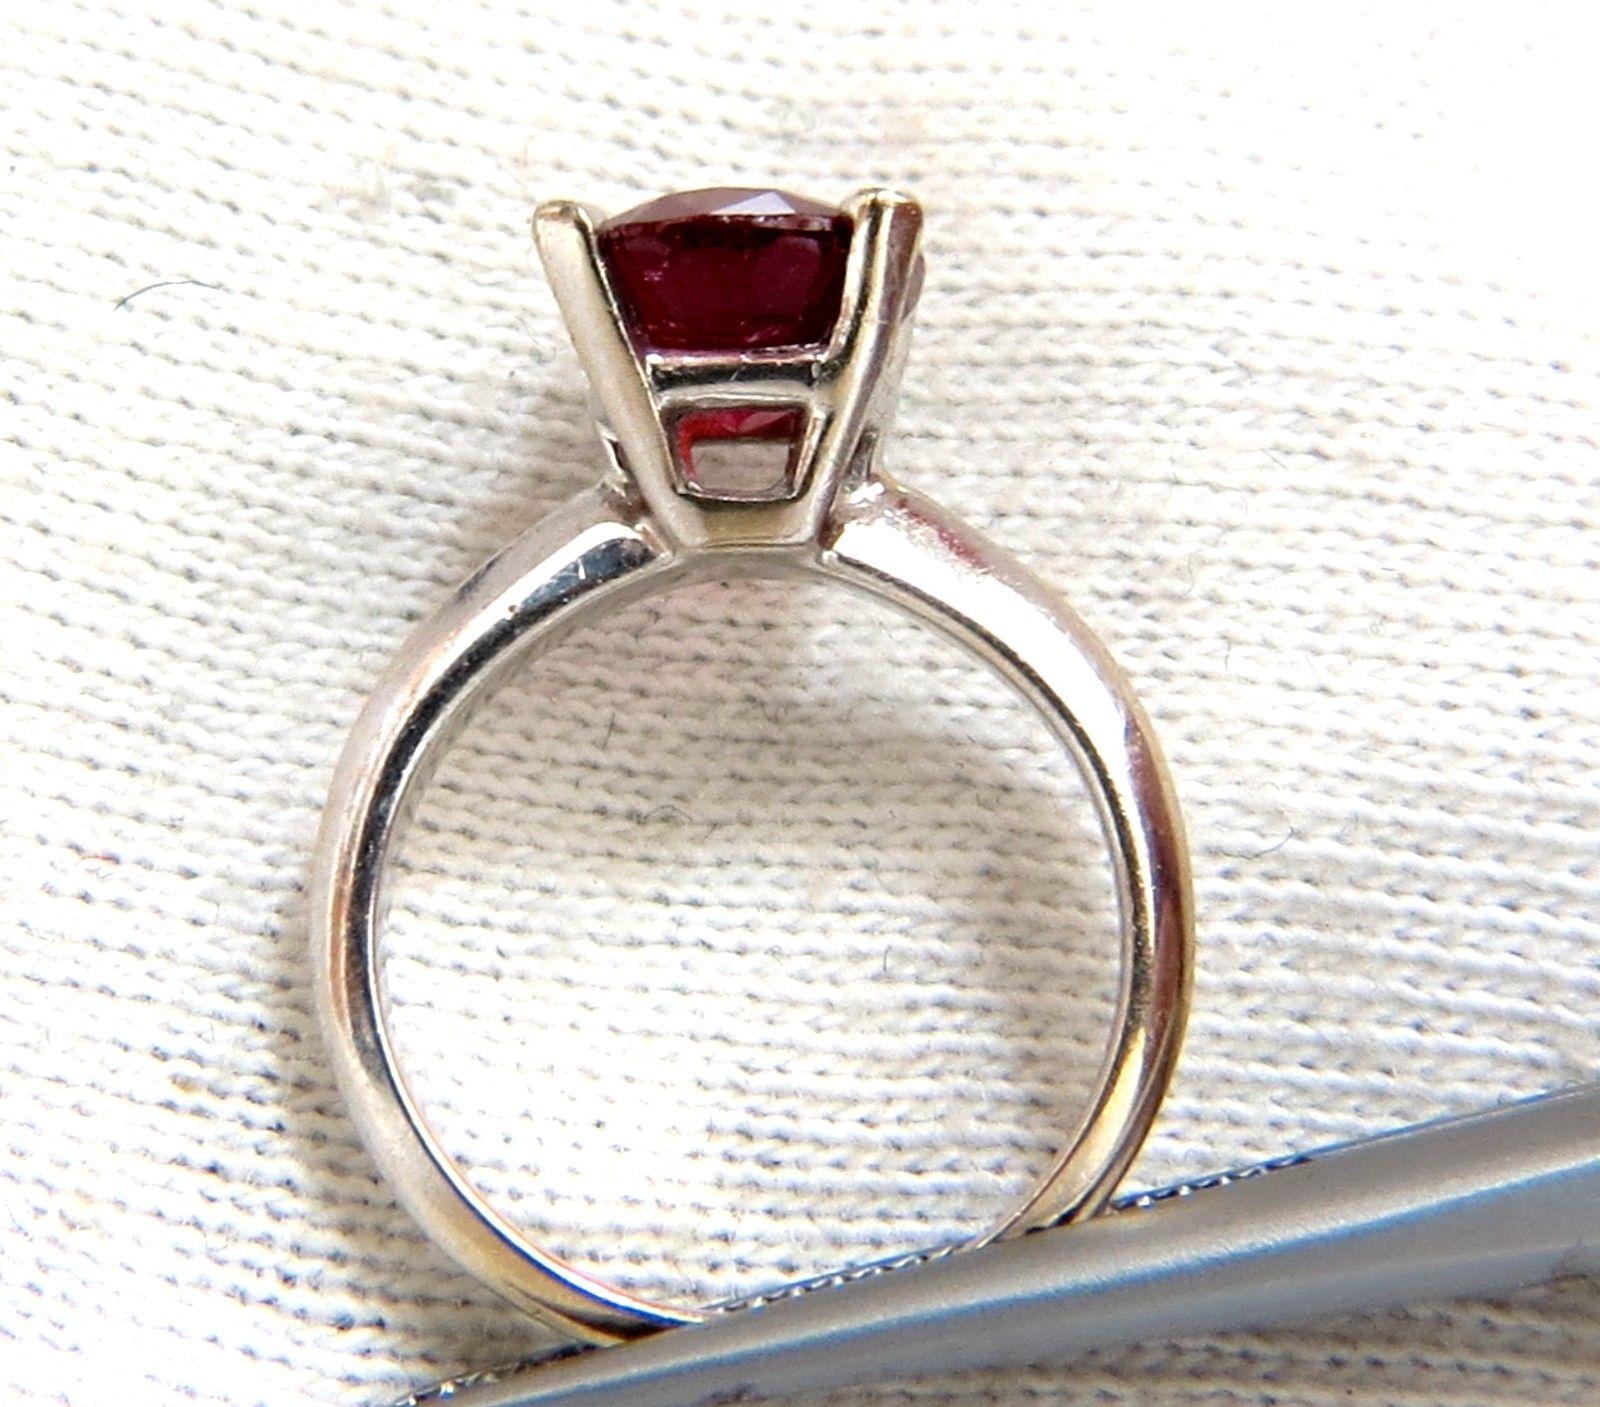 2.65ct. Natural Bright Pink Tourmaline Solitaire ring.

Semi clean clarity

The Fine Gem Tourmaline

10.4 x 7.8mm

14kt. white gold 

depth of ring: 7.7mm

3.4 grams total weight

Amazing split shank deco

current ring size: 4

May resize.